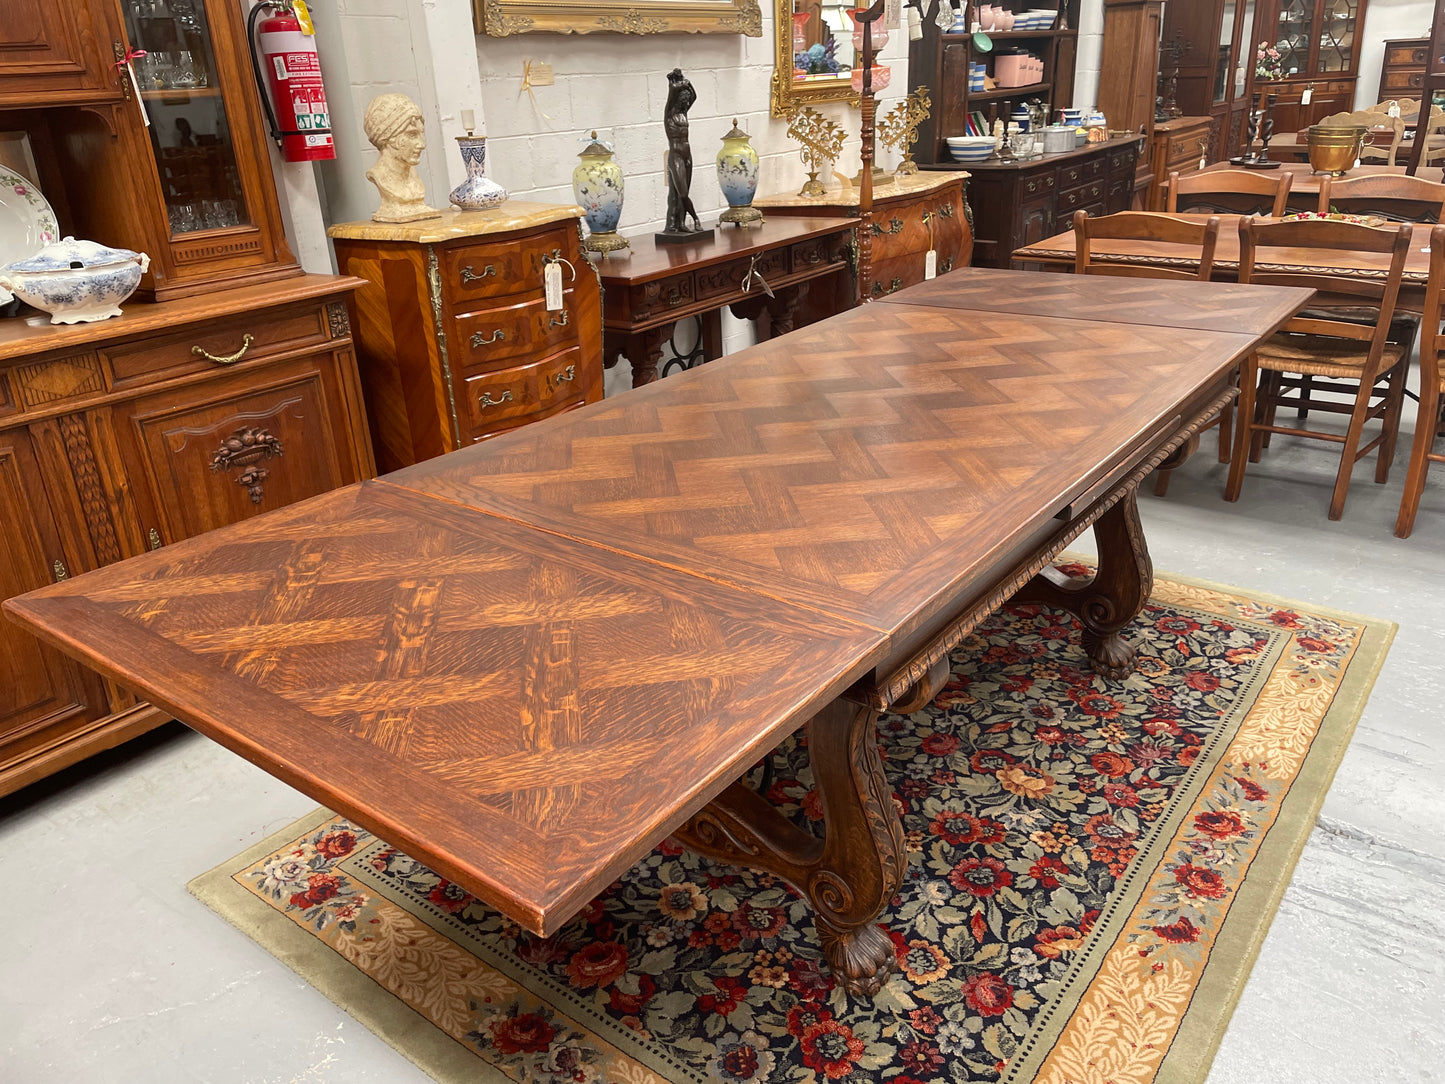 Beautiful French Oak Spanish style extension dining table with a decorative iron base and parquetry top. Lovely carvings on the legs and the skirt of the base.  With the extensions closed it is 160 cm long and when fully extended it is 268 cm long. It has been sourced from France and in good original condition.